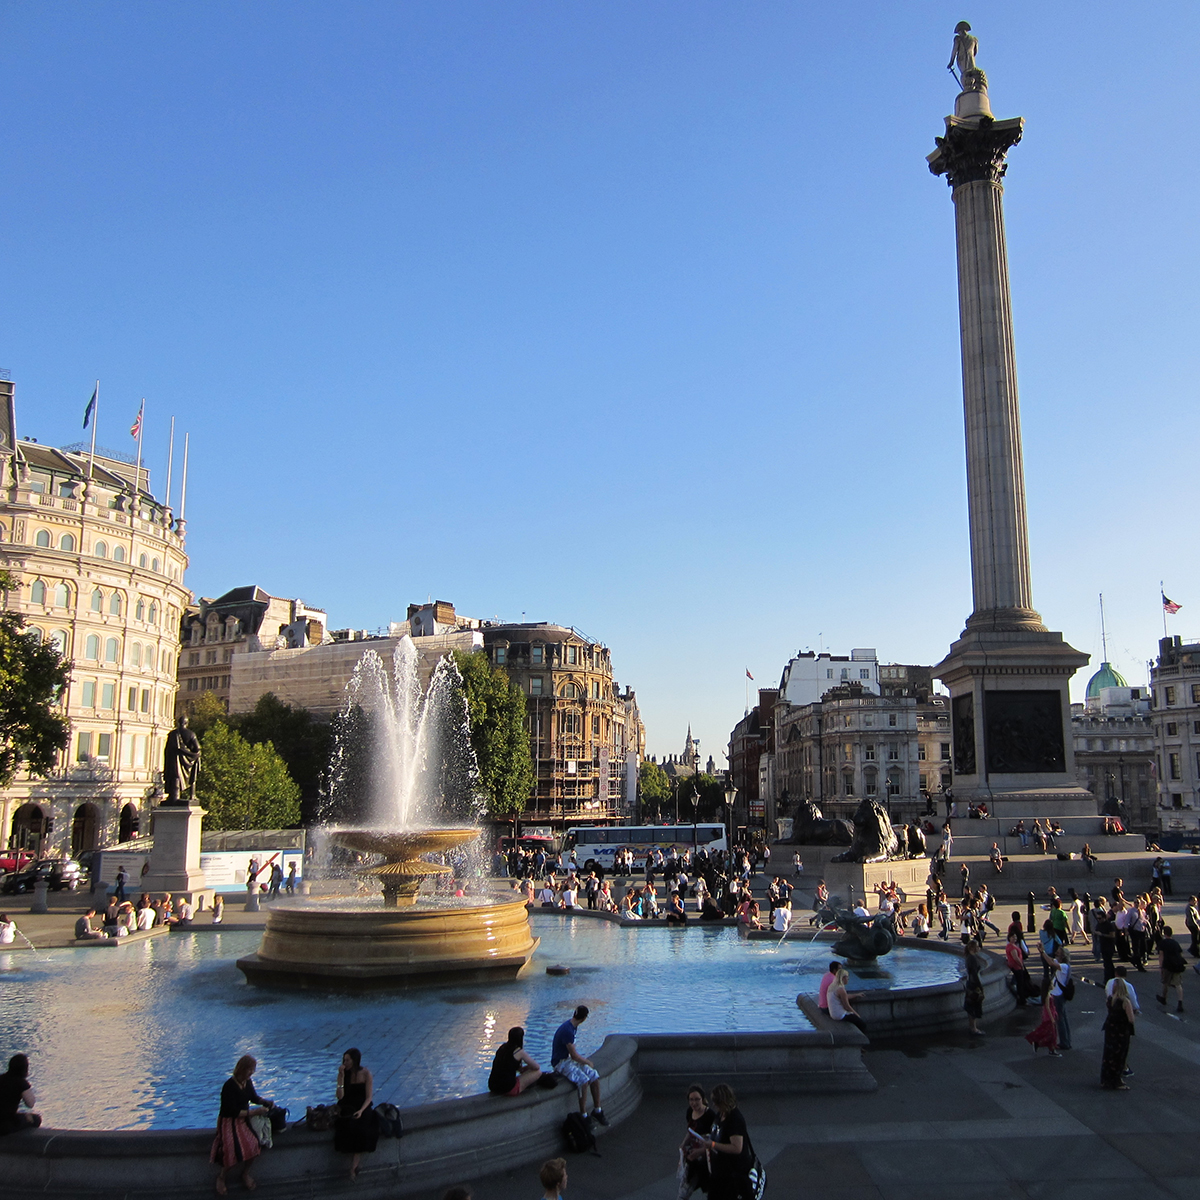 what is trafalgar tours known for